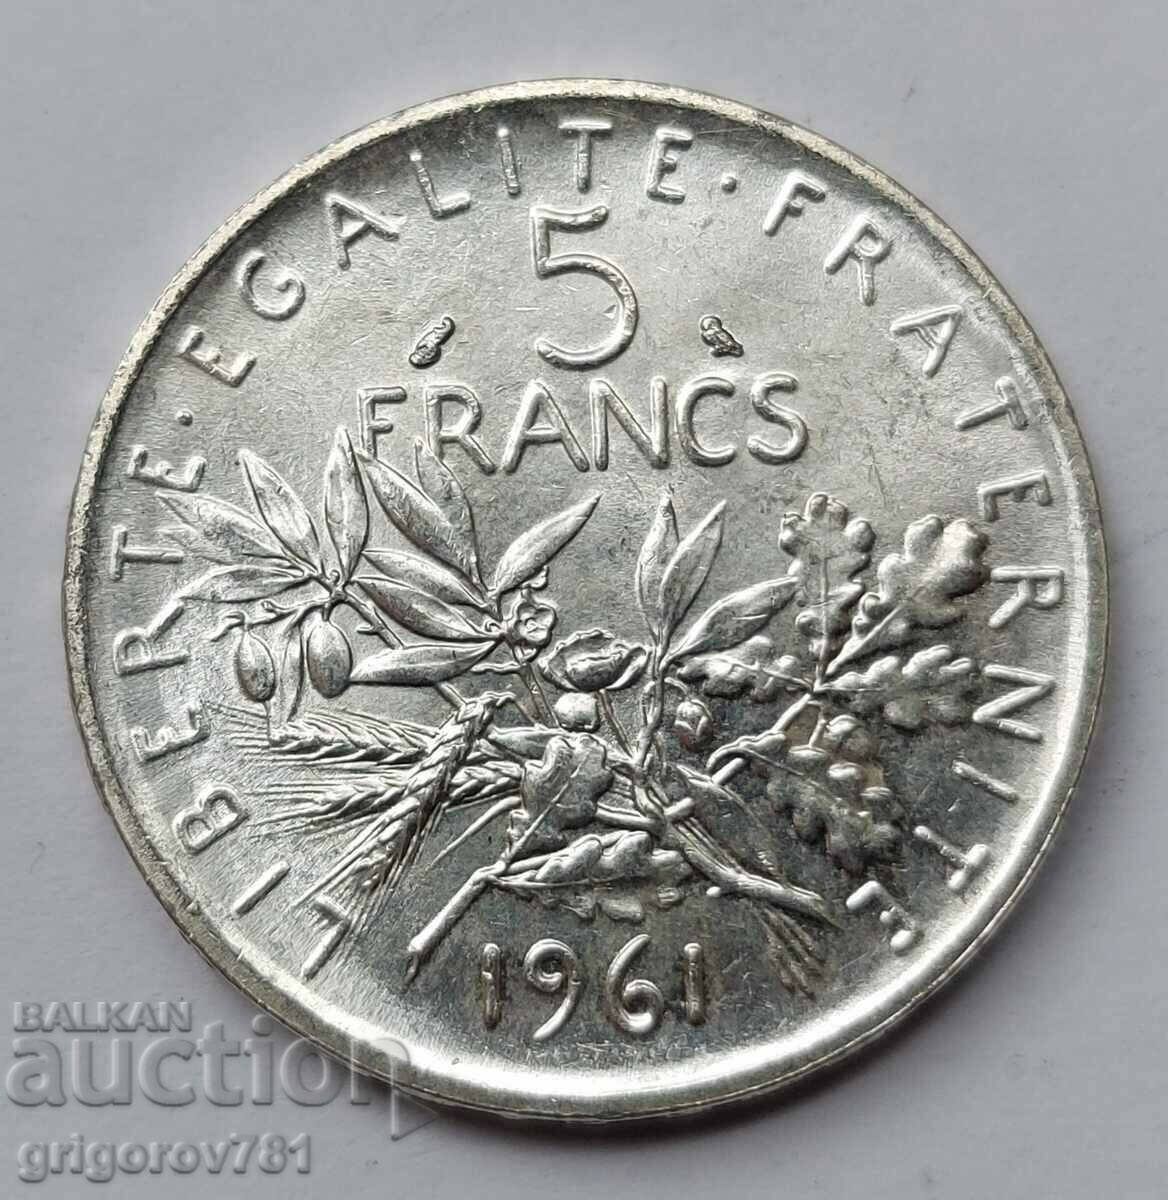 5 Francs Silver France 1961 - Silver Coin #2